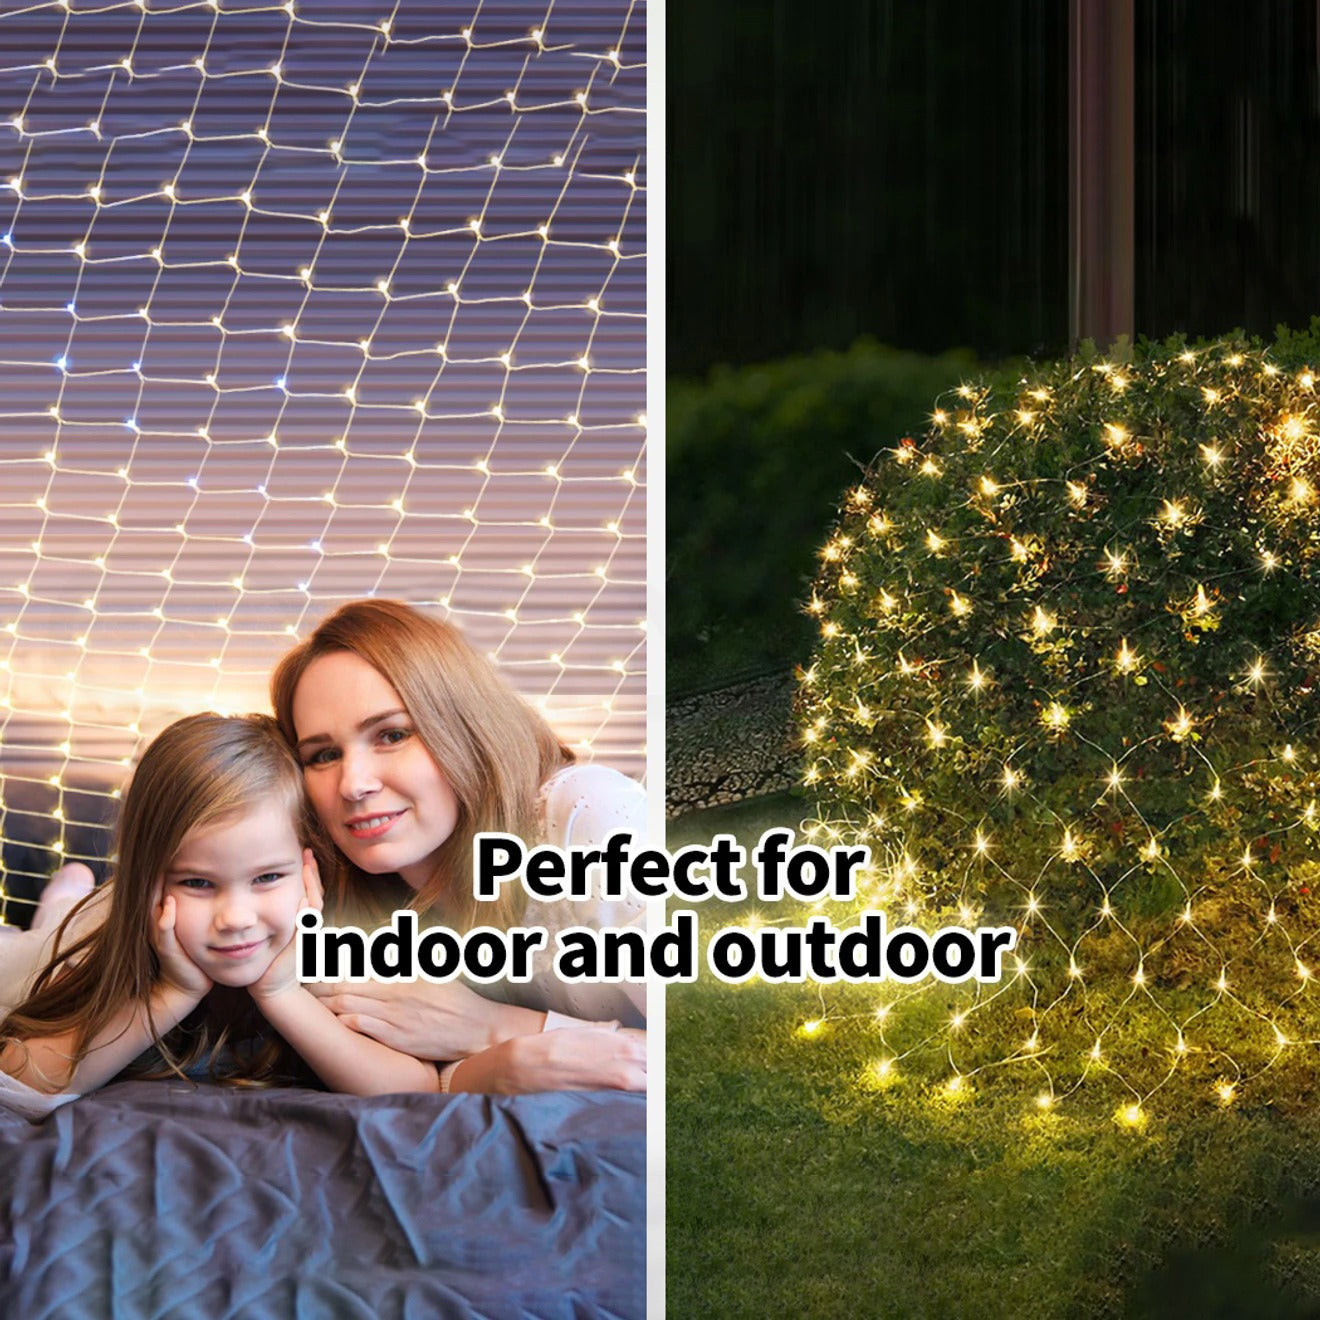 Solar LED Mesh String Lights perfect for indoor as well as outdoor